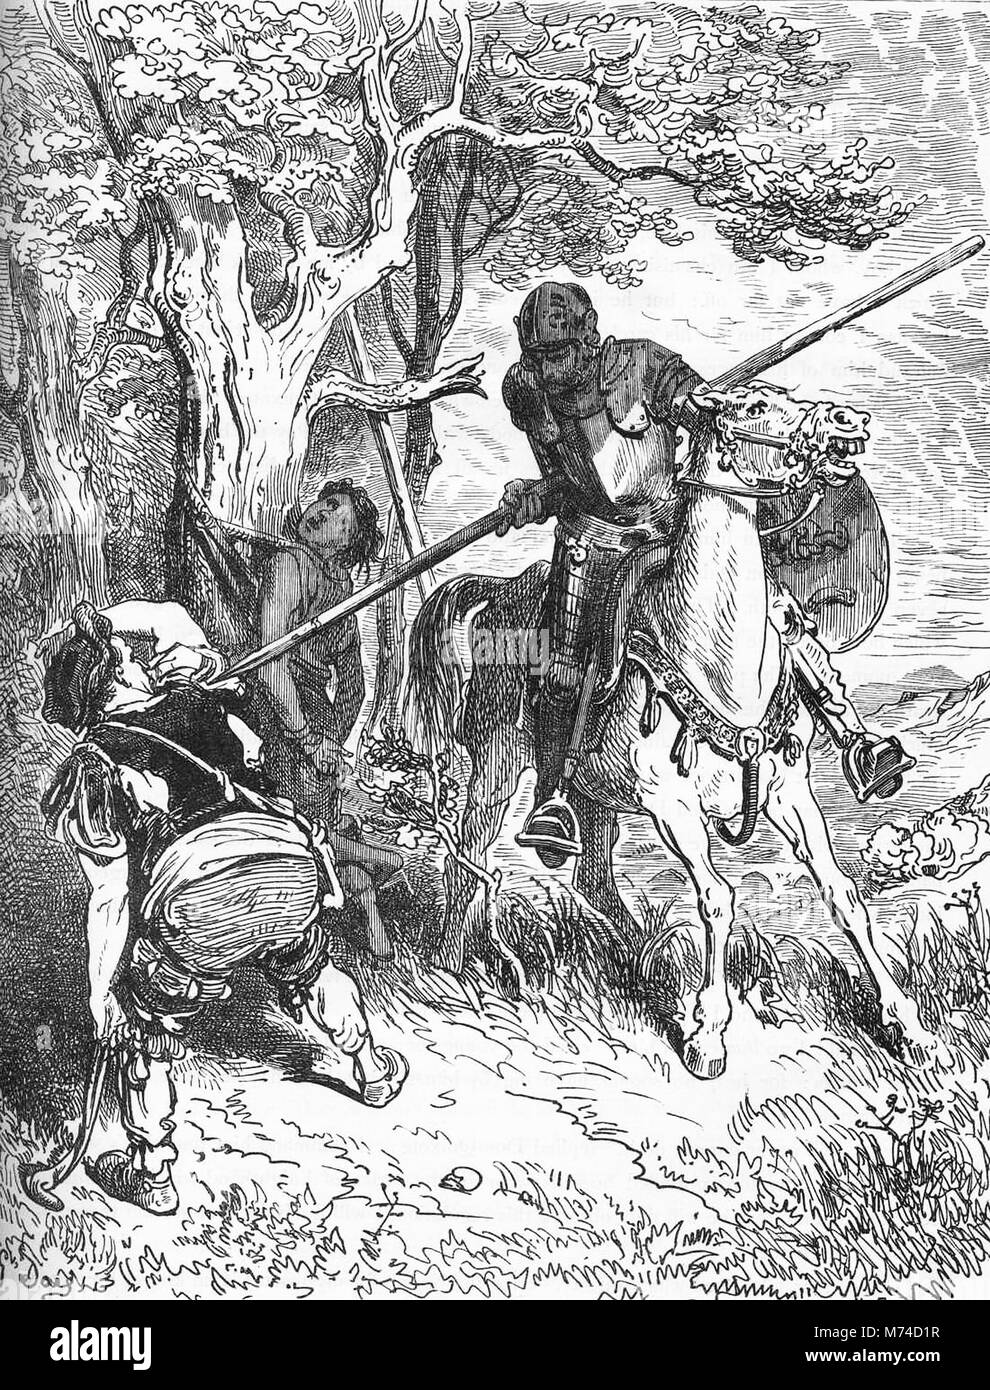 Don Quixote, an illustration by Gustave Dore from an 1880 edition of Cervantes' Don Quixote. Stock Photo